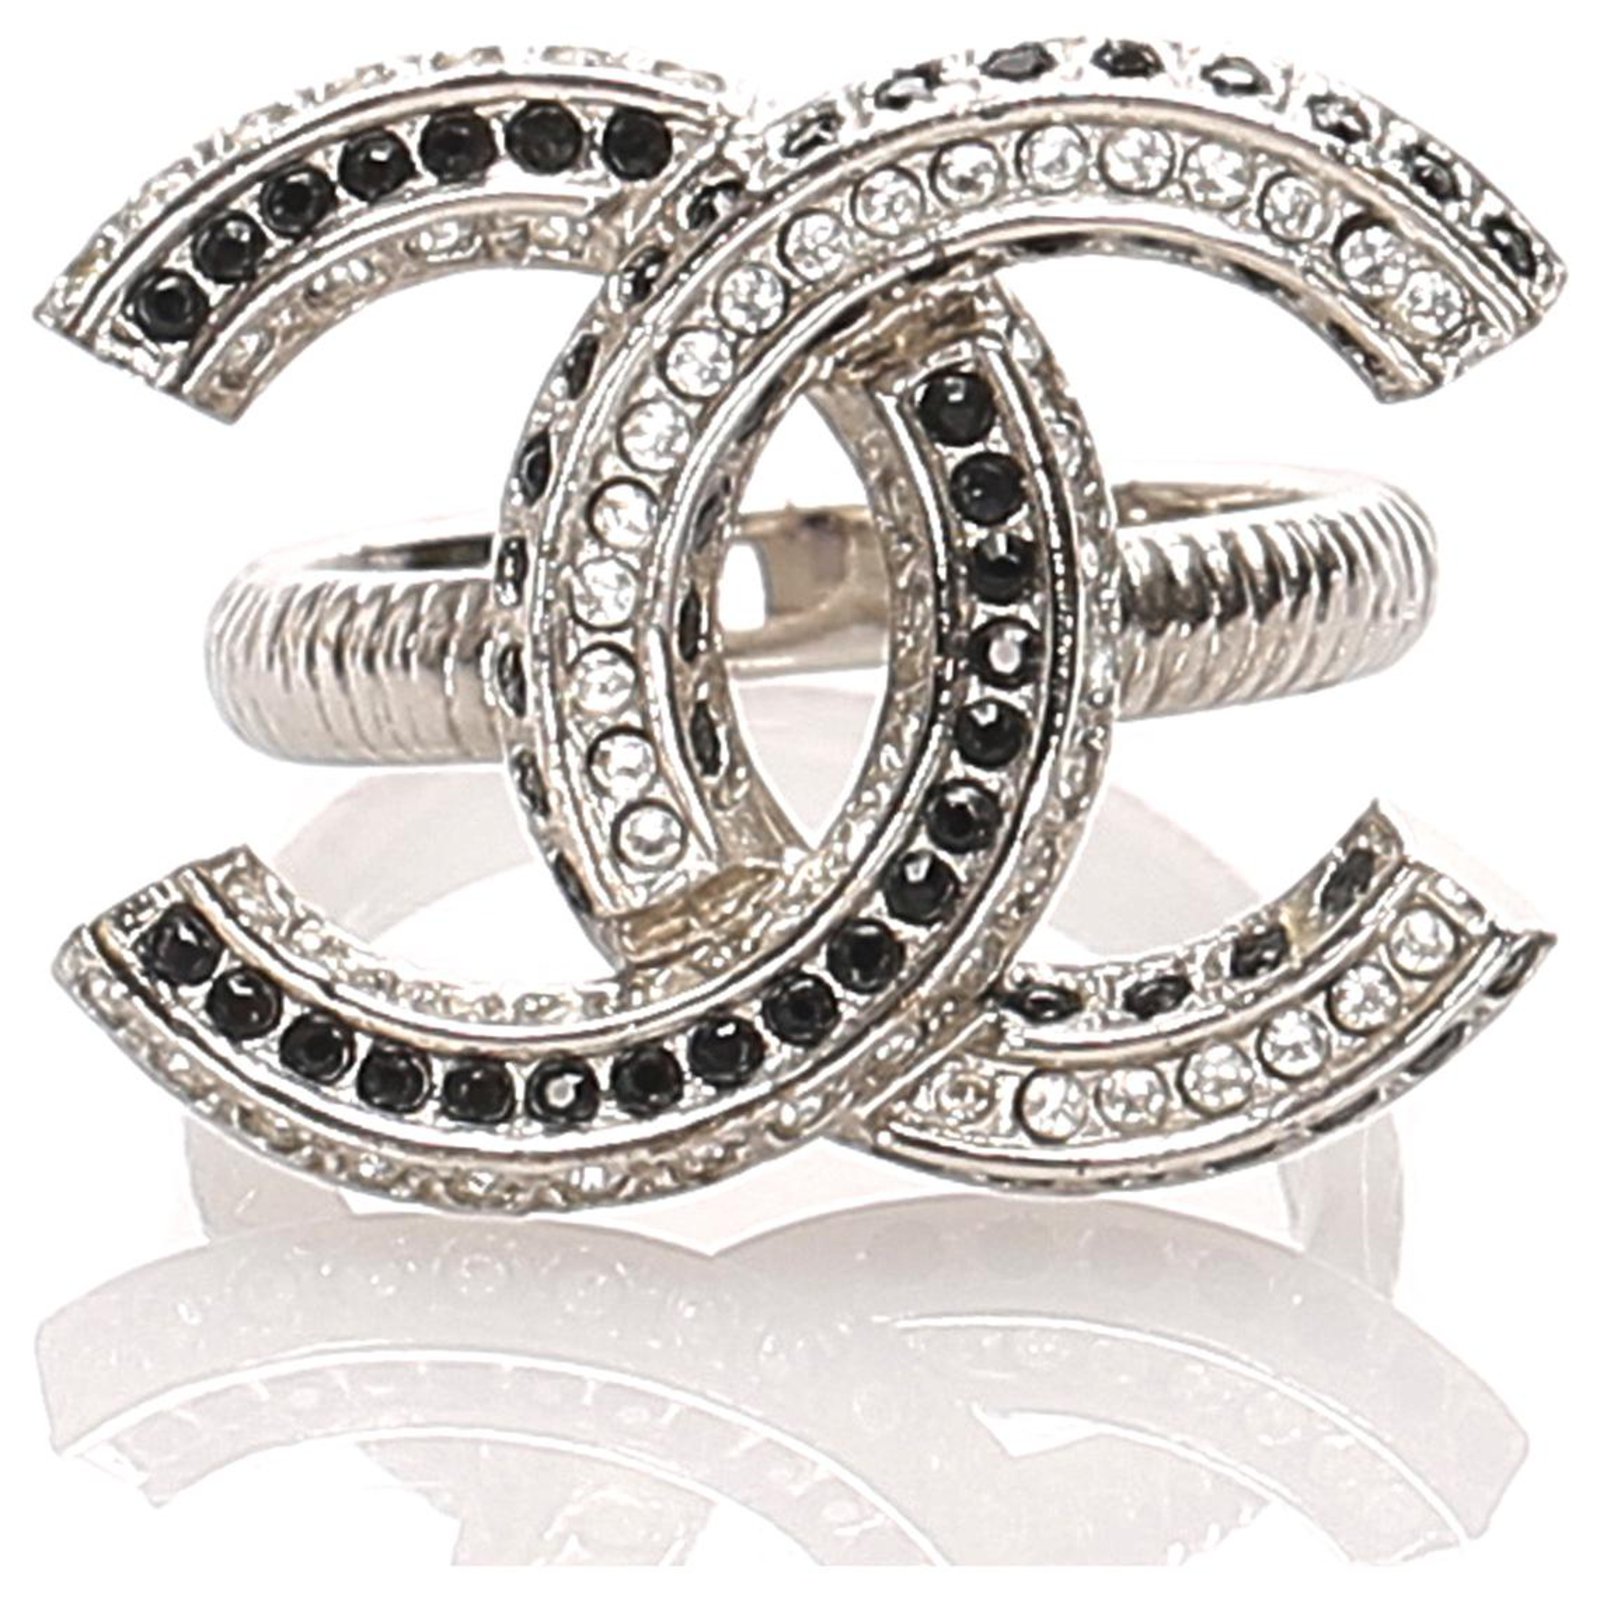 Pin by Mellyn Mitchell on ღabulous ღ in 2023  Chanel ring  Diamond jewelry designs Chanel jewelry